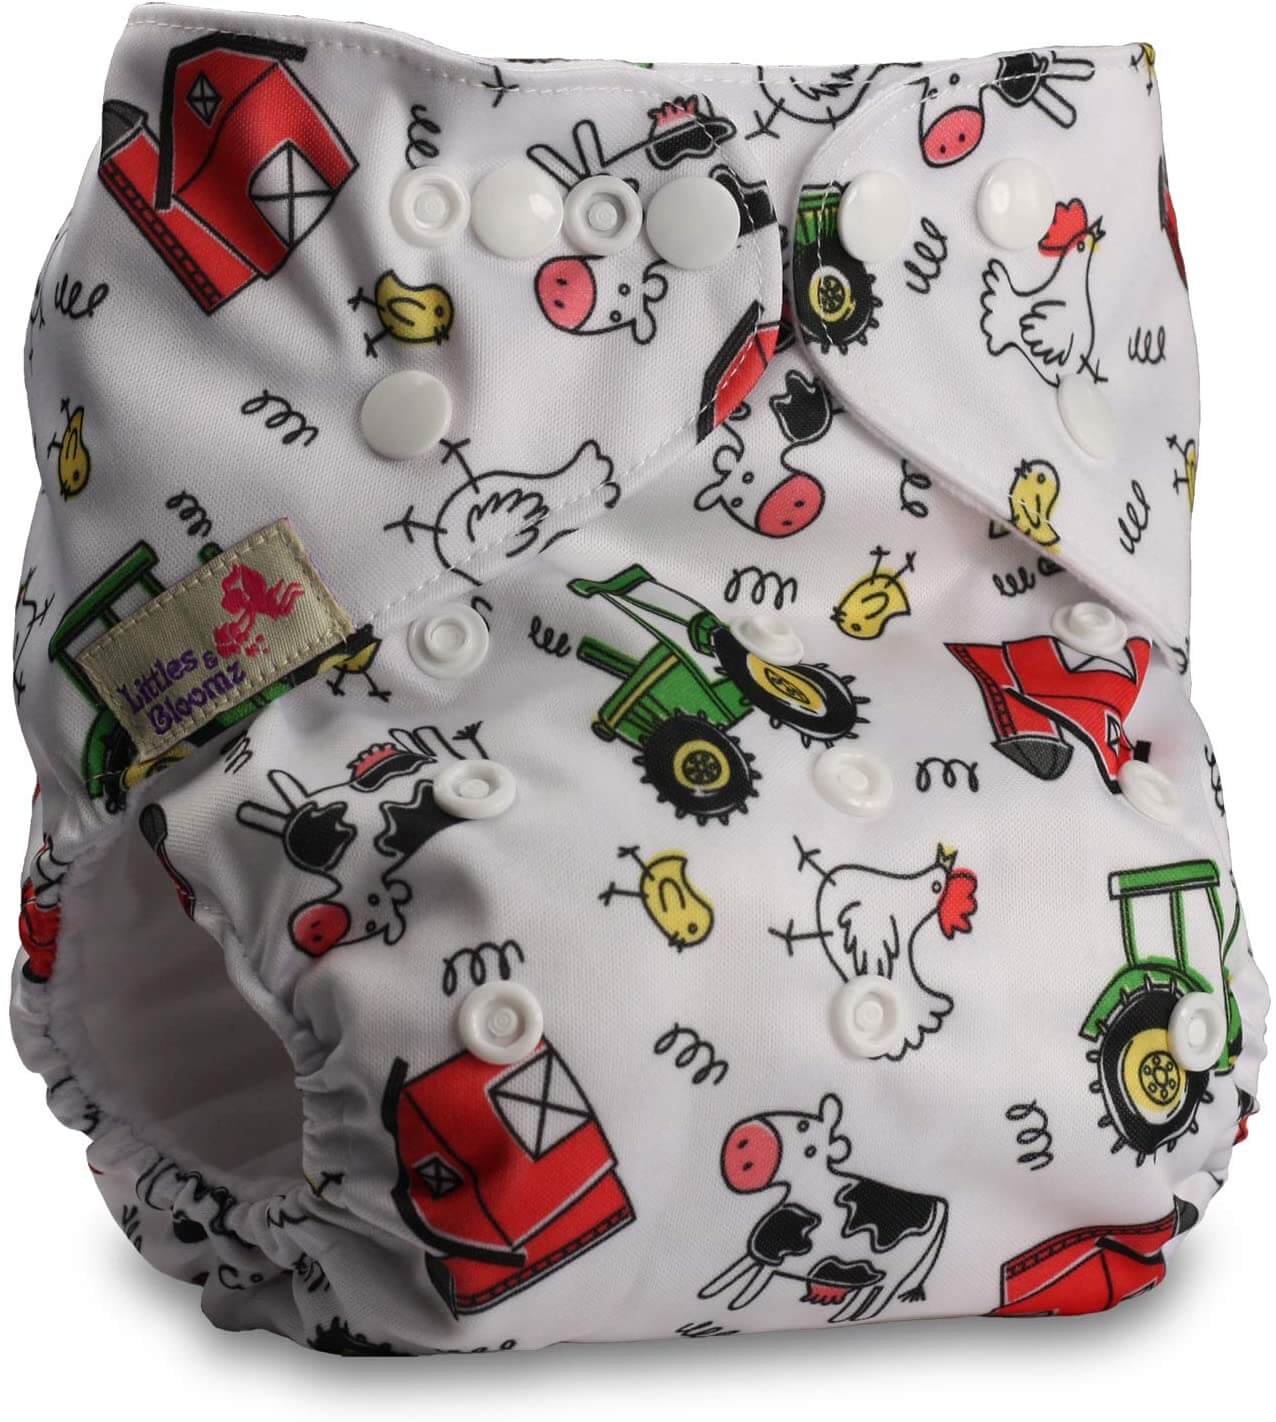 Pocket Cloth Diapers